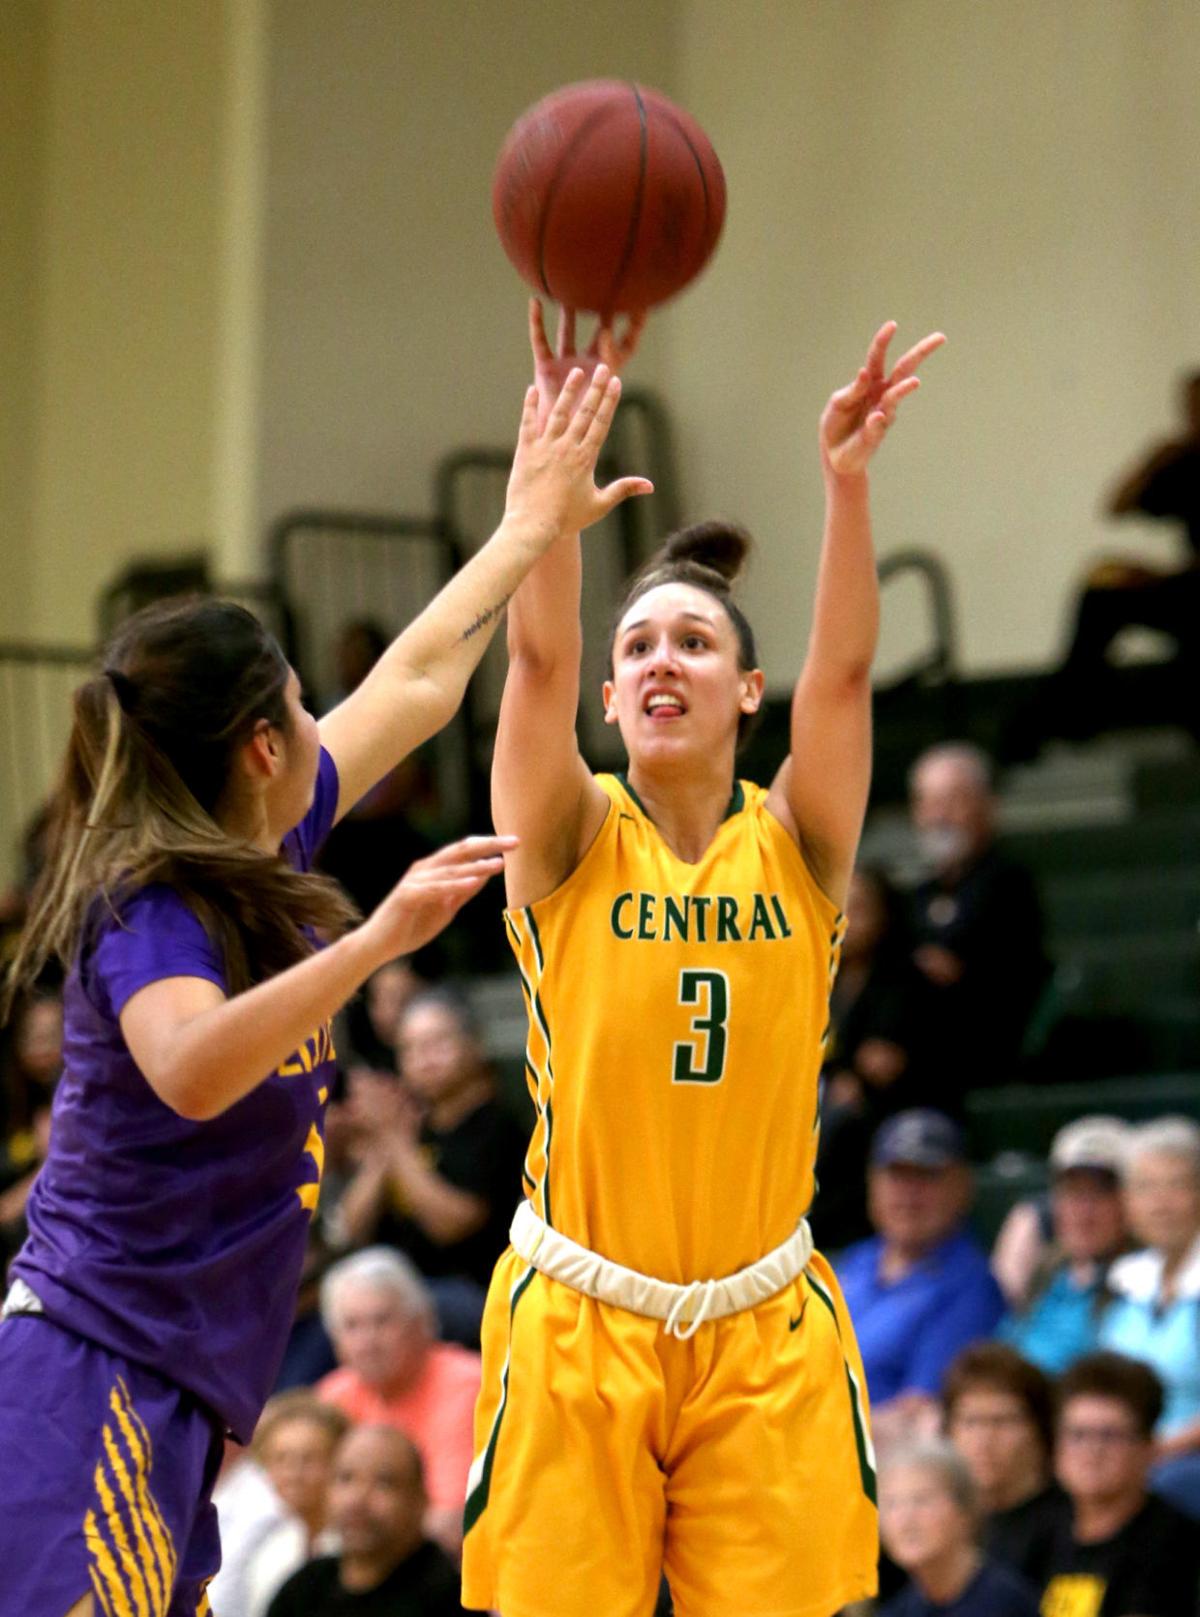 All ACCAC player Megan Guadian shoots from 3 point range in play-off win against Eastern Arizona